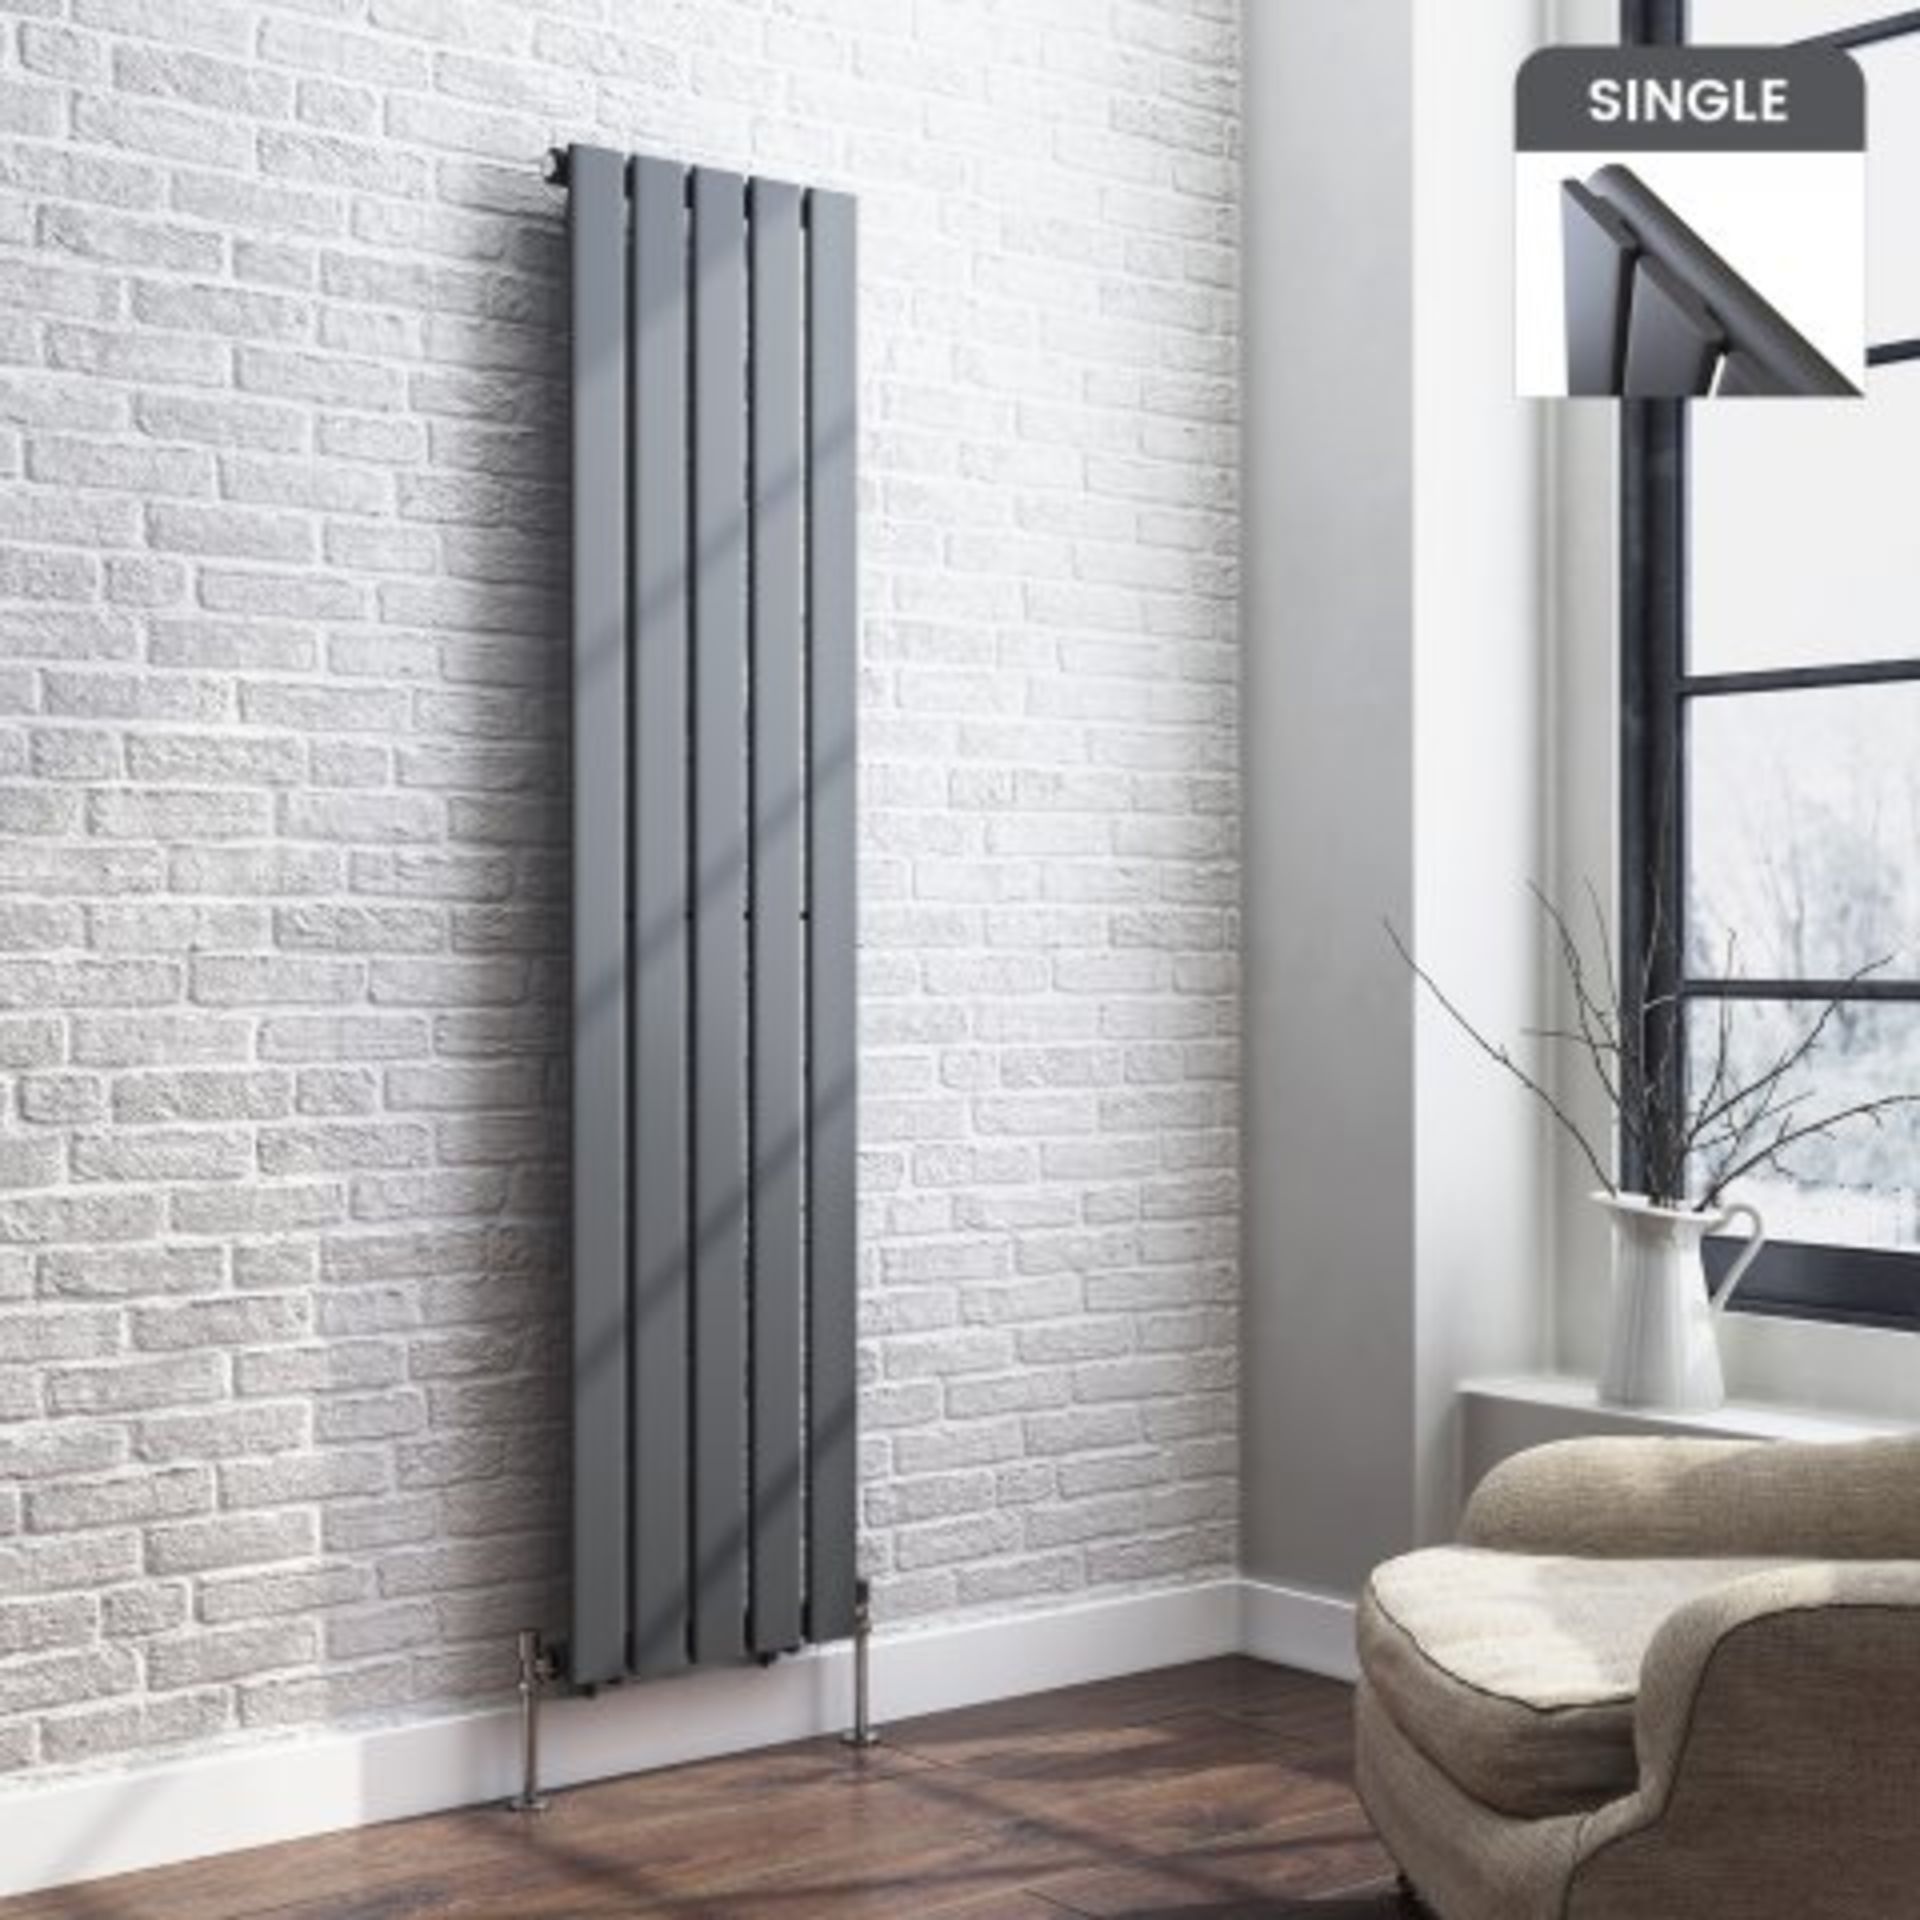 (I4) 1600x376mm Anthracite Single Flat Panel Vertical Radiator RRP £275.99 Designer Touch Ultra-